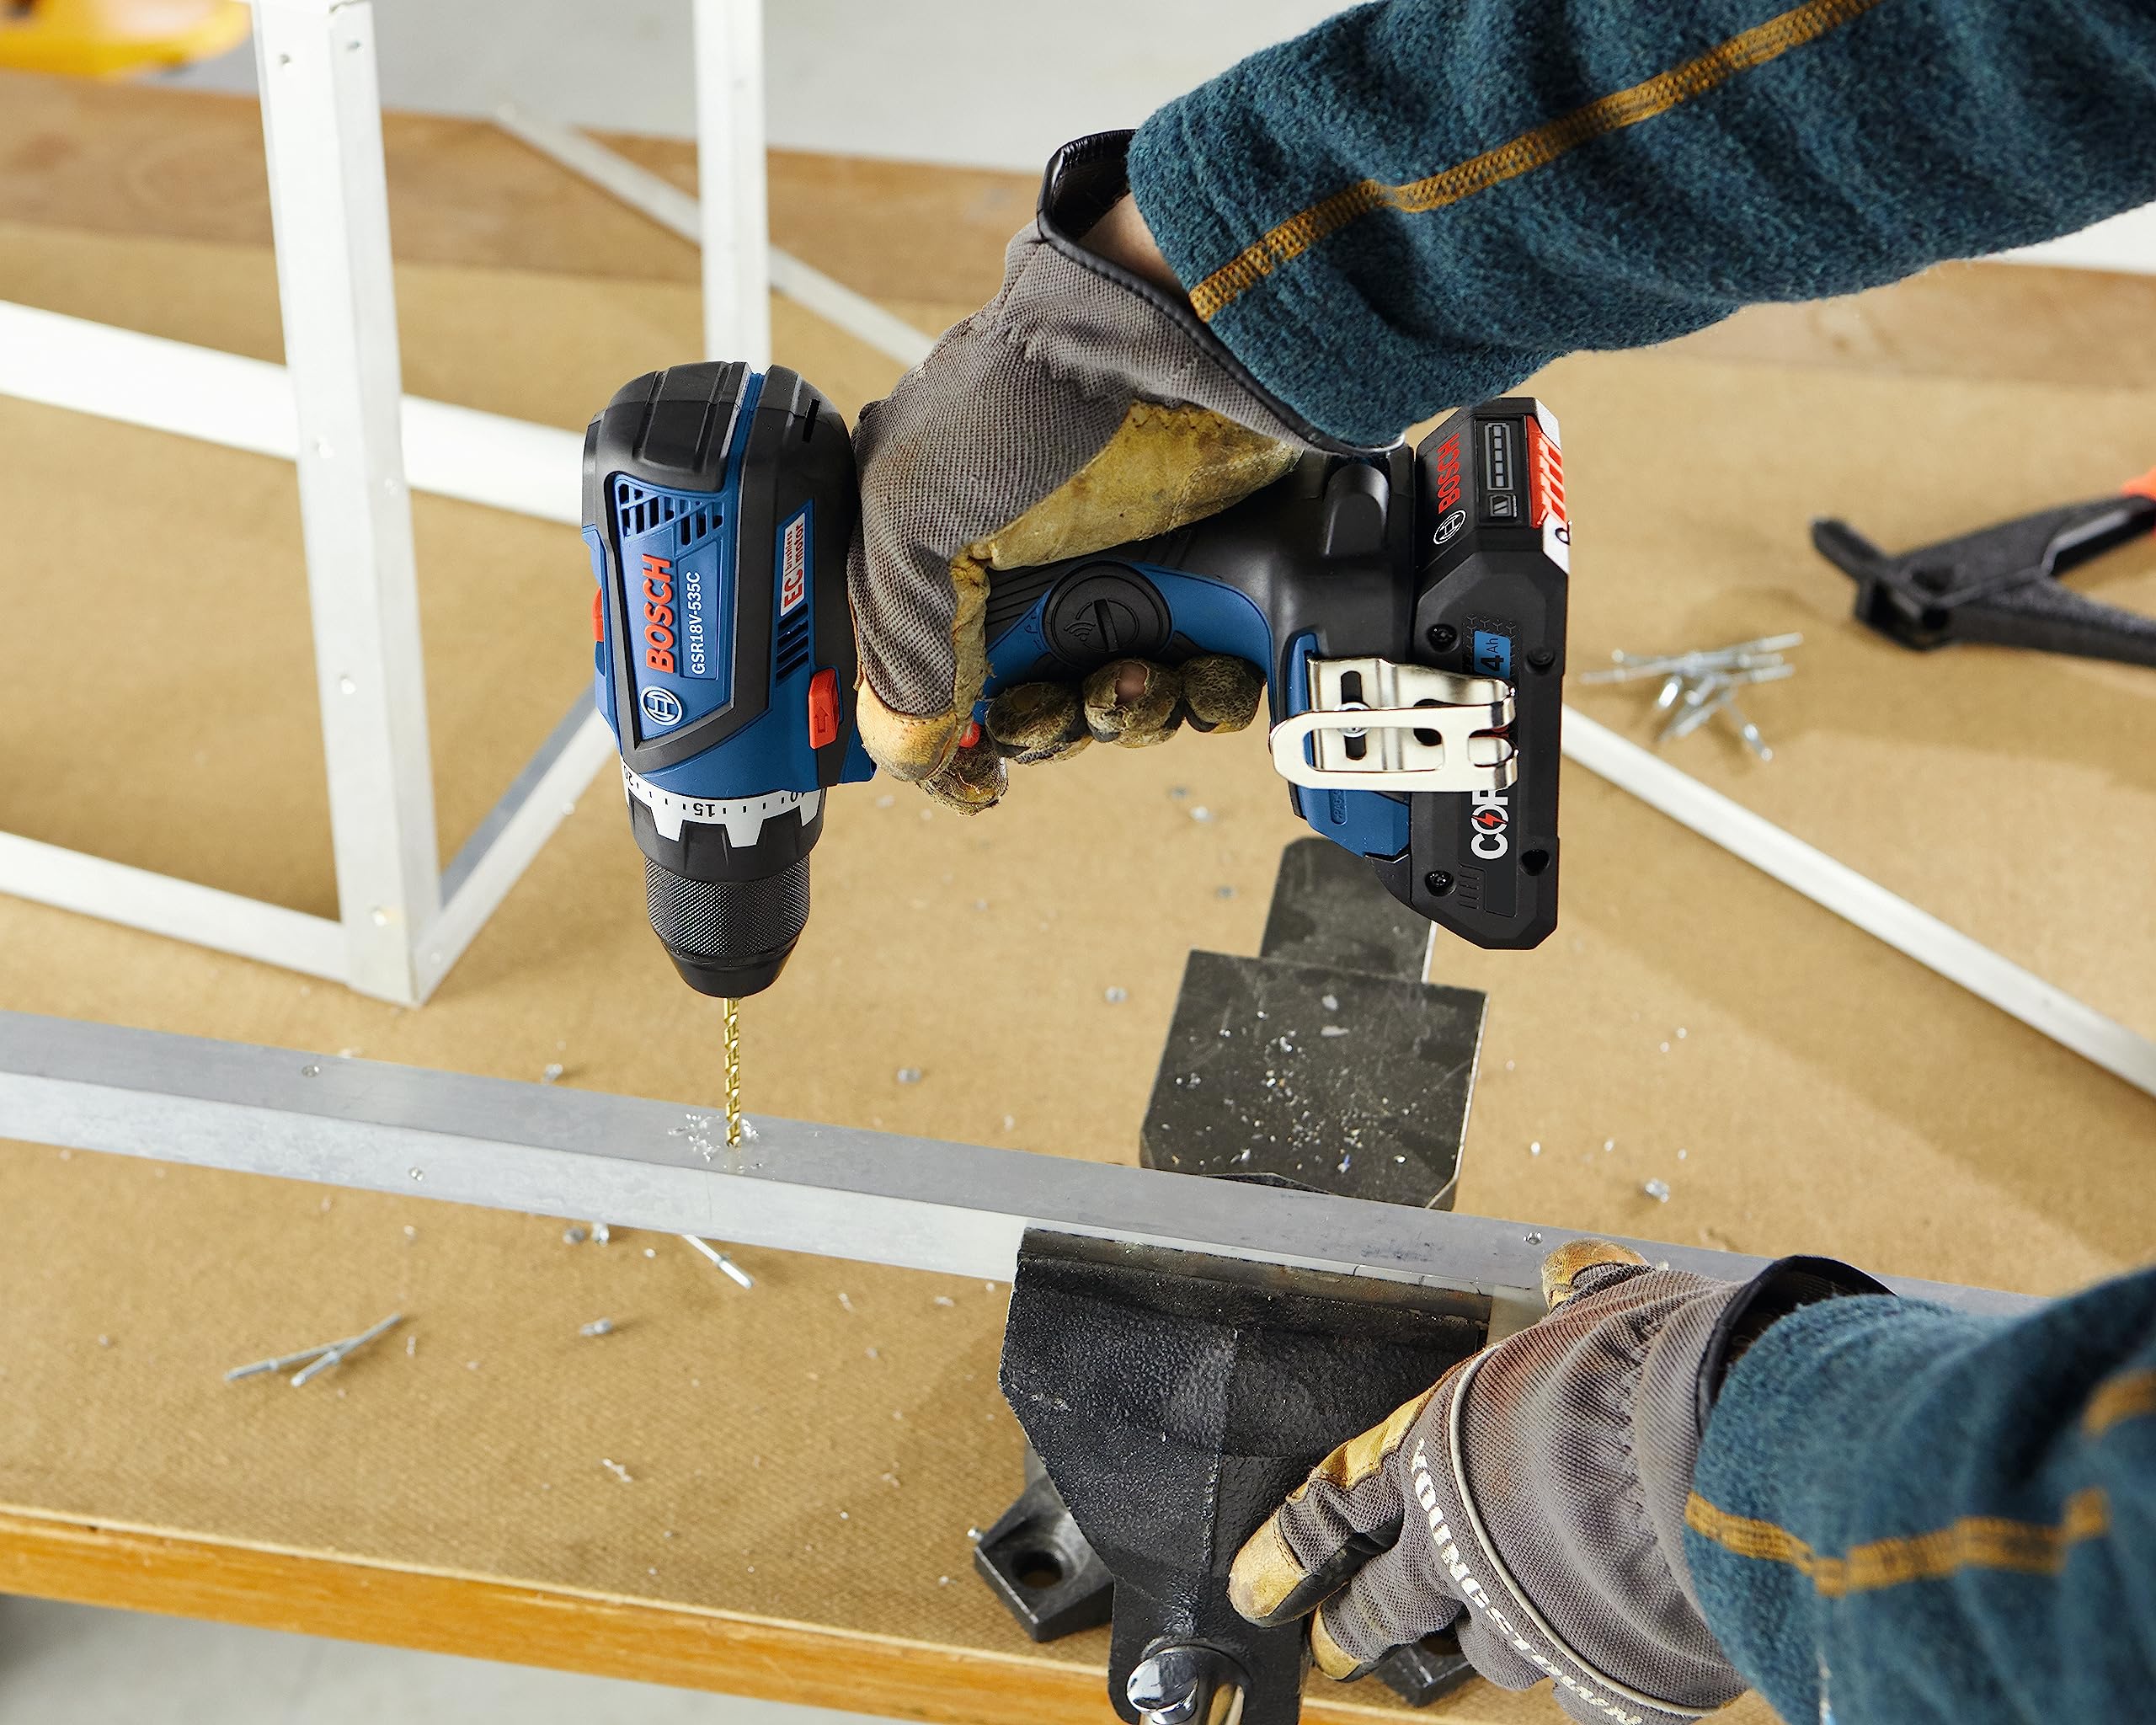 BOSCH GSR18V-535CN 18V EC Brushless Connected-Ready Compact Tough 1/2 In. Drill/Driver (Bare Tool)